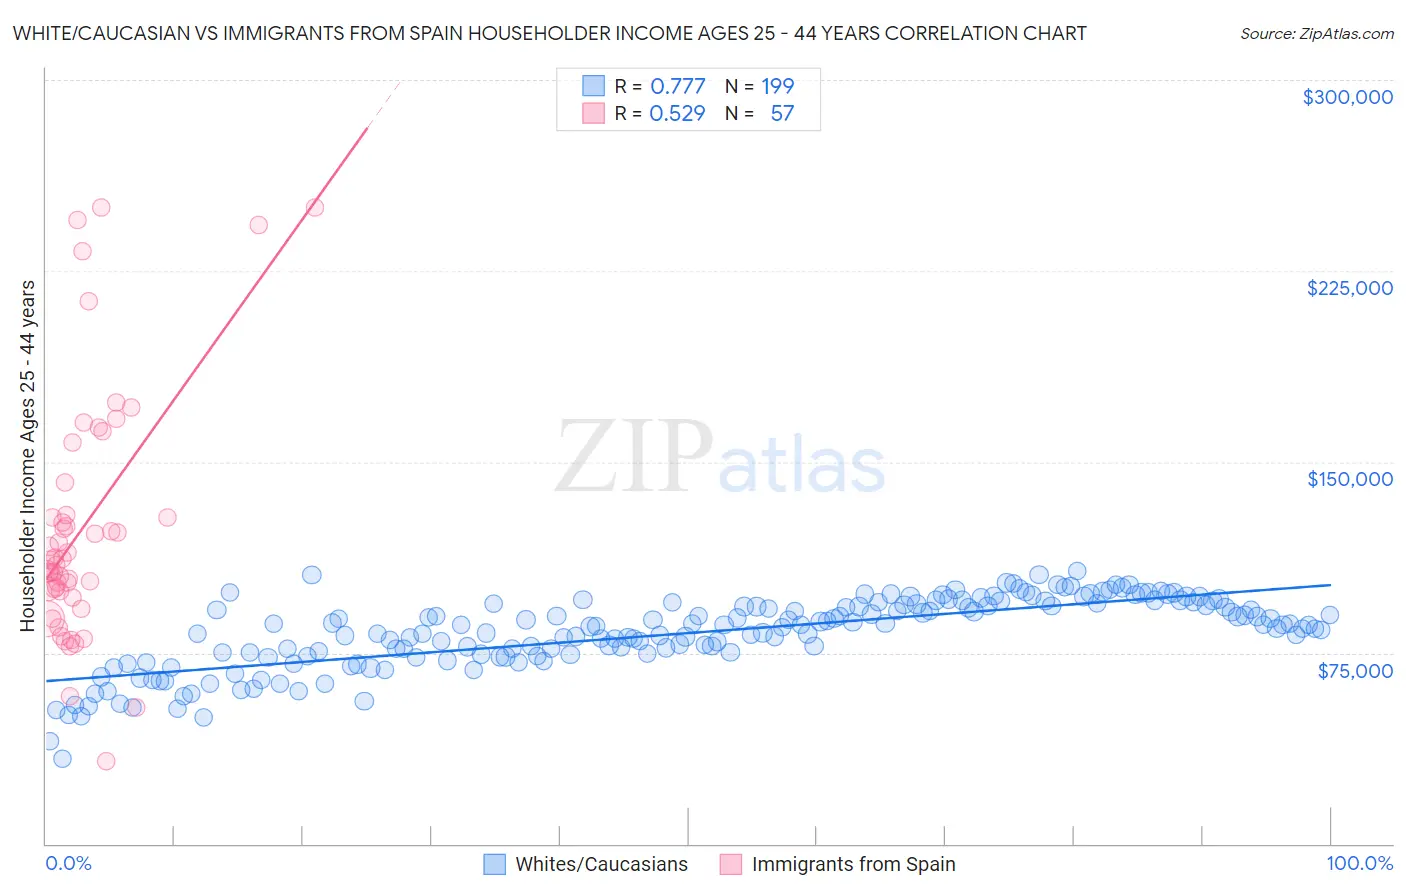 White/Caucasian vs Immigrants from Spain Householder Income Ages 25 - 44 years